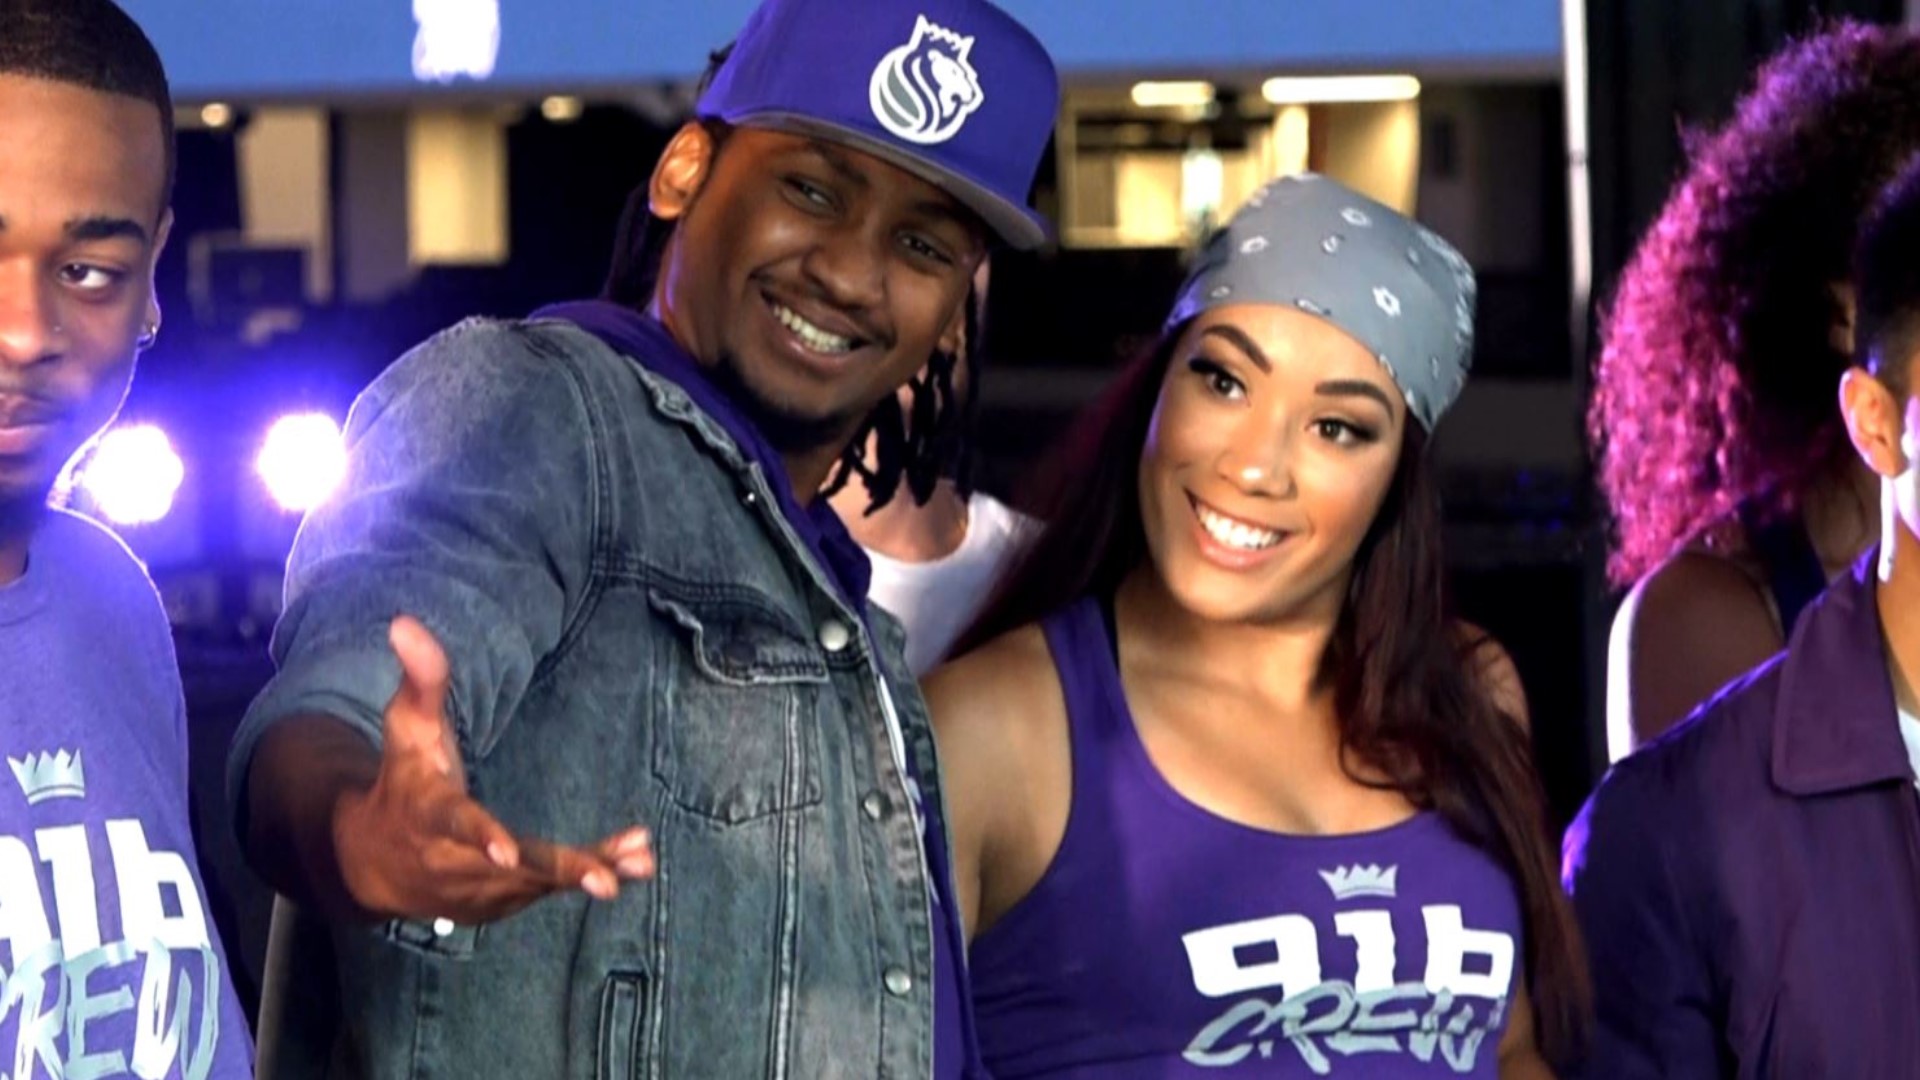 In celebration of "916 Day" in Sacramento, the Kings introduce their new gender-inclusive dance team: the 916 Crew. The hip-hop group is preparing for its inaugural season in Sacramento following the announcement that the all-female Sacramento Kings Dancers were evolving into a new team with a new style of dance.